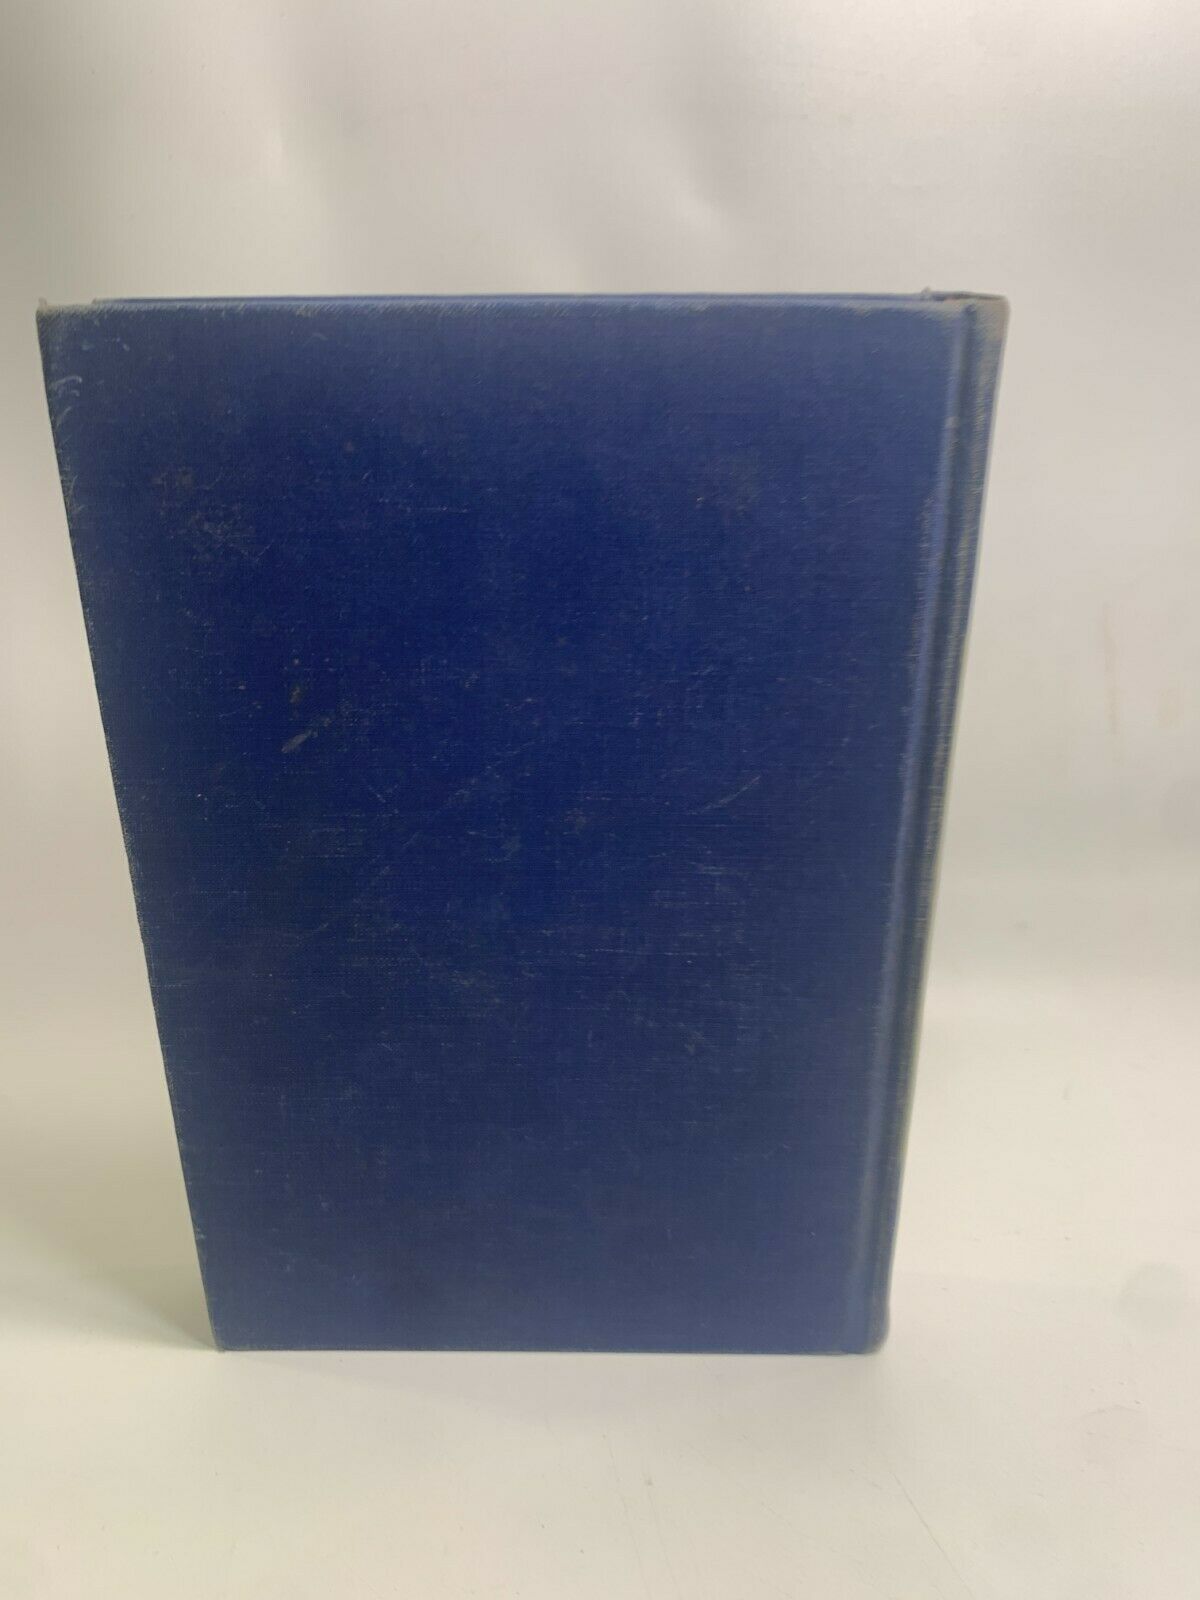 ENGLISH IN ACTION Course Four by J.C. Tressler 1945